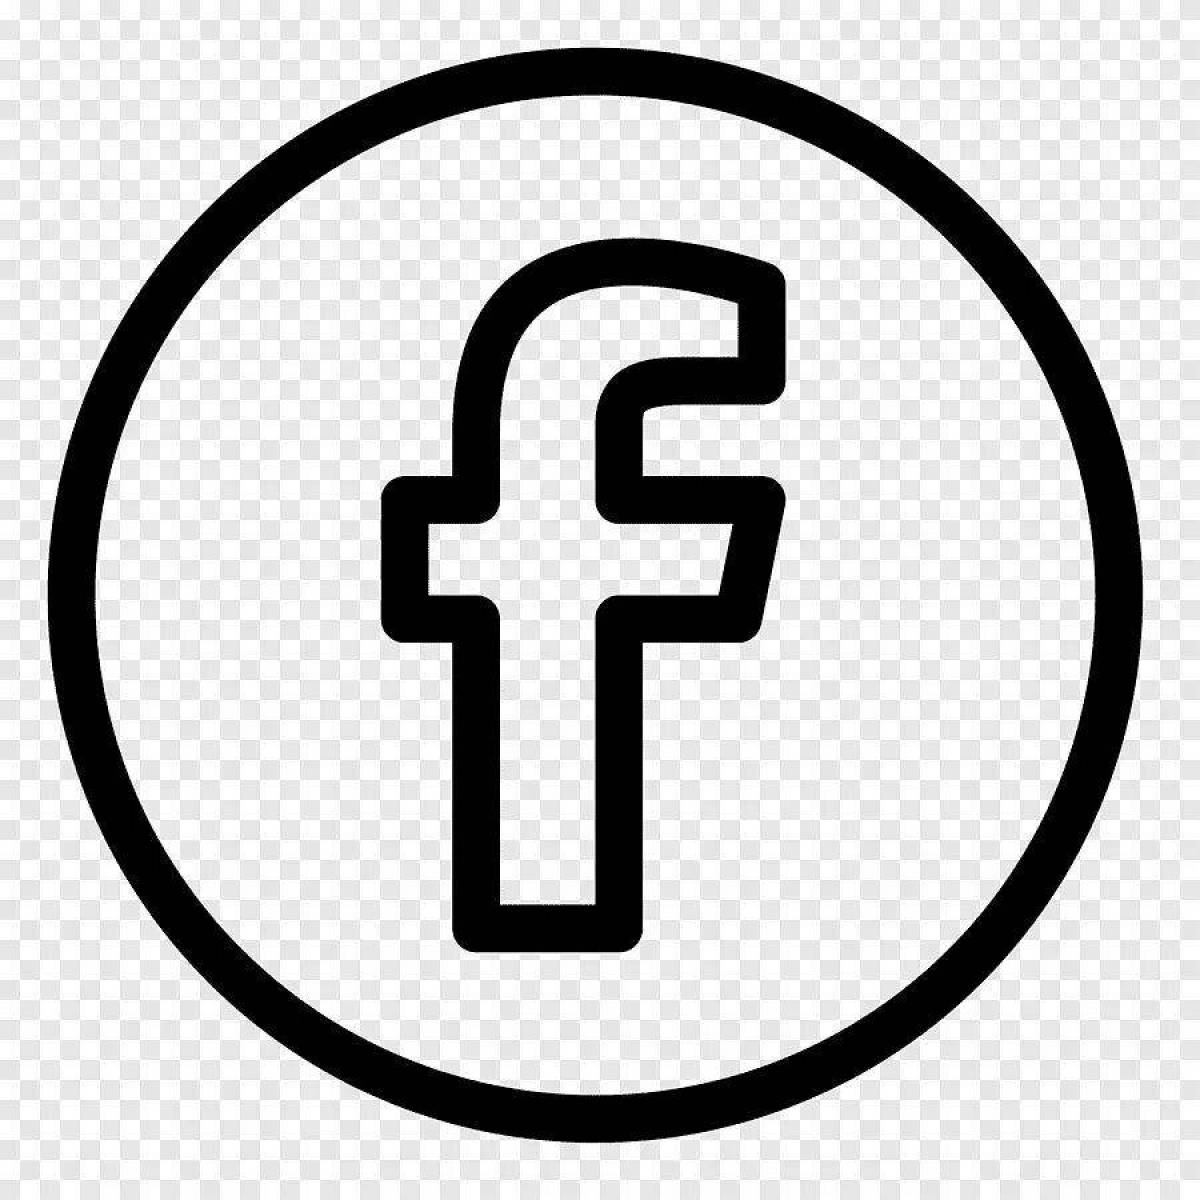 Unique coloring pages with social media logos